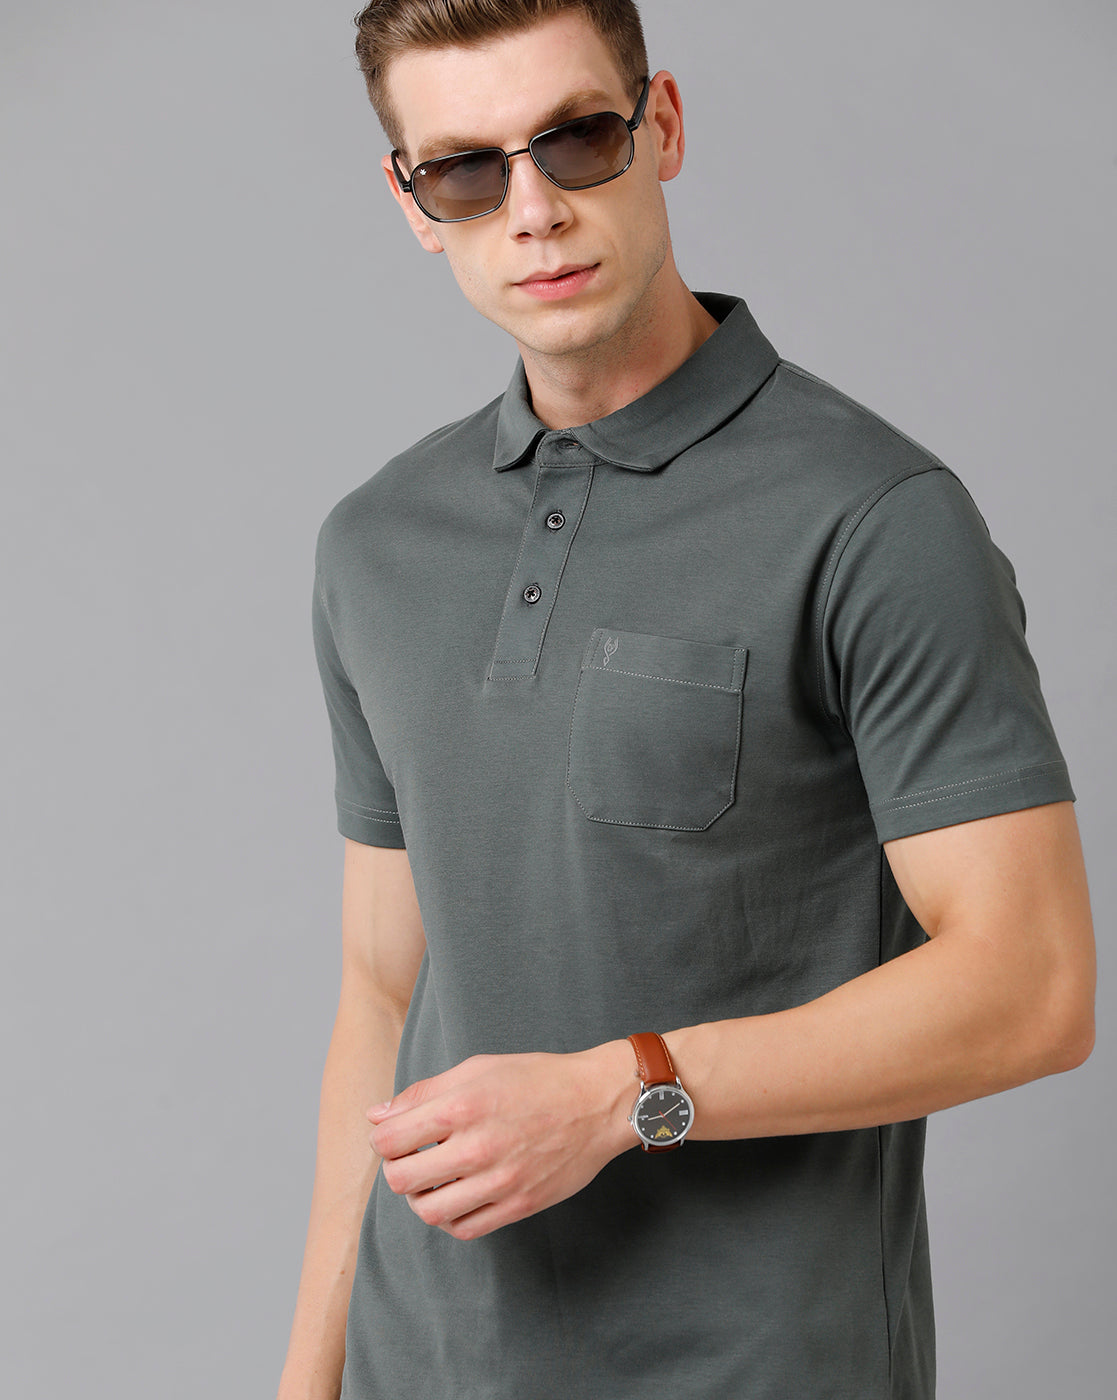 Classic polo Men's Anthra Grey Melange Polo Half Sleeve Slim Fit T-Shirt -  Toza- Anthra Mel - Classic Polo